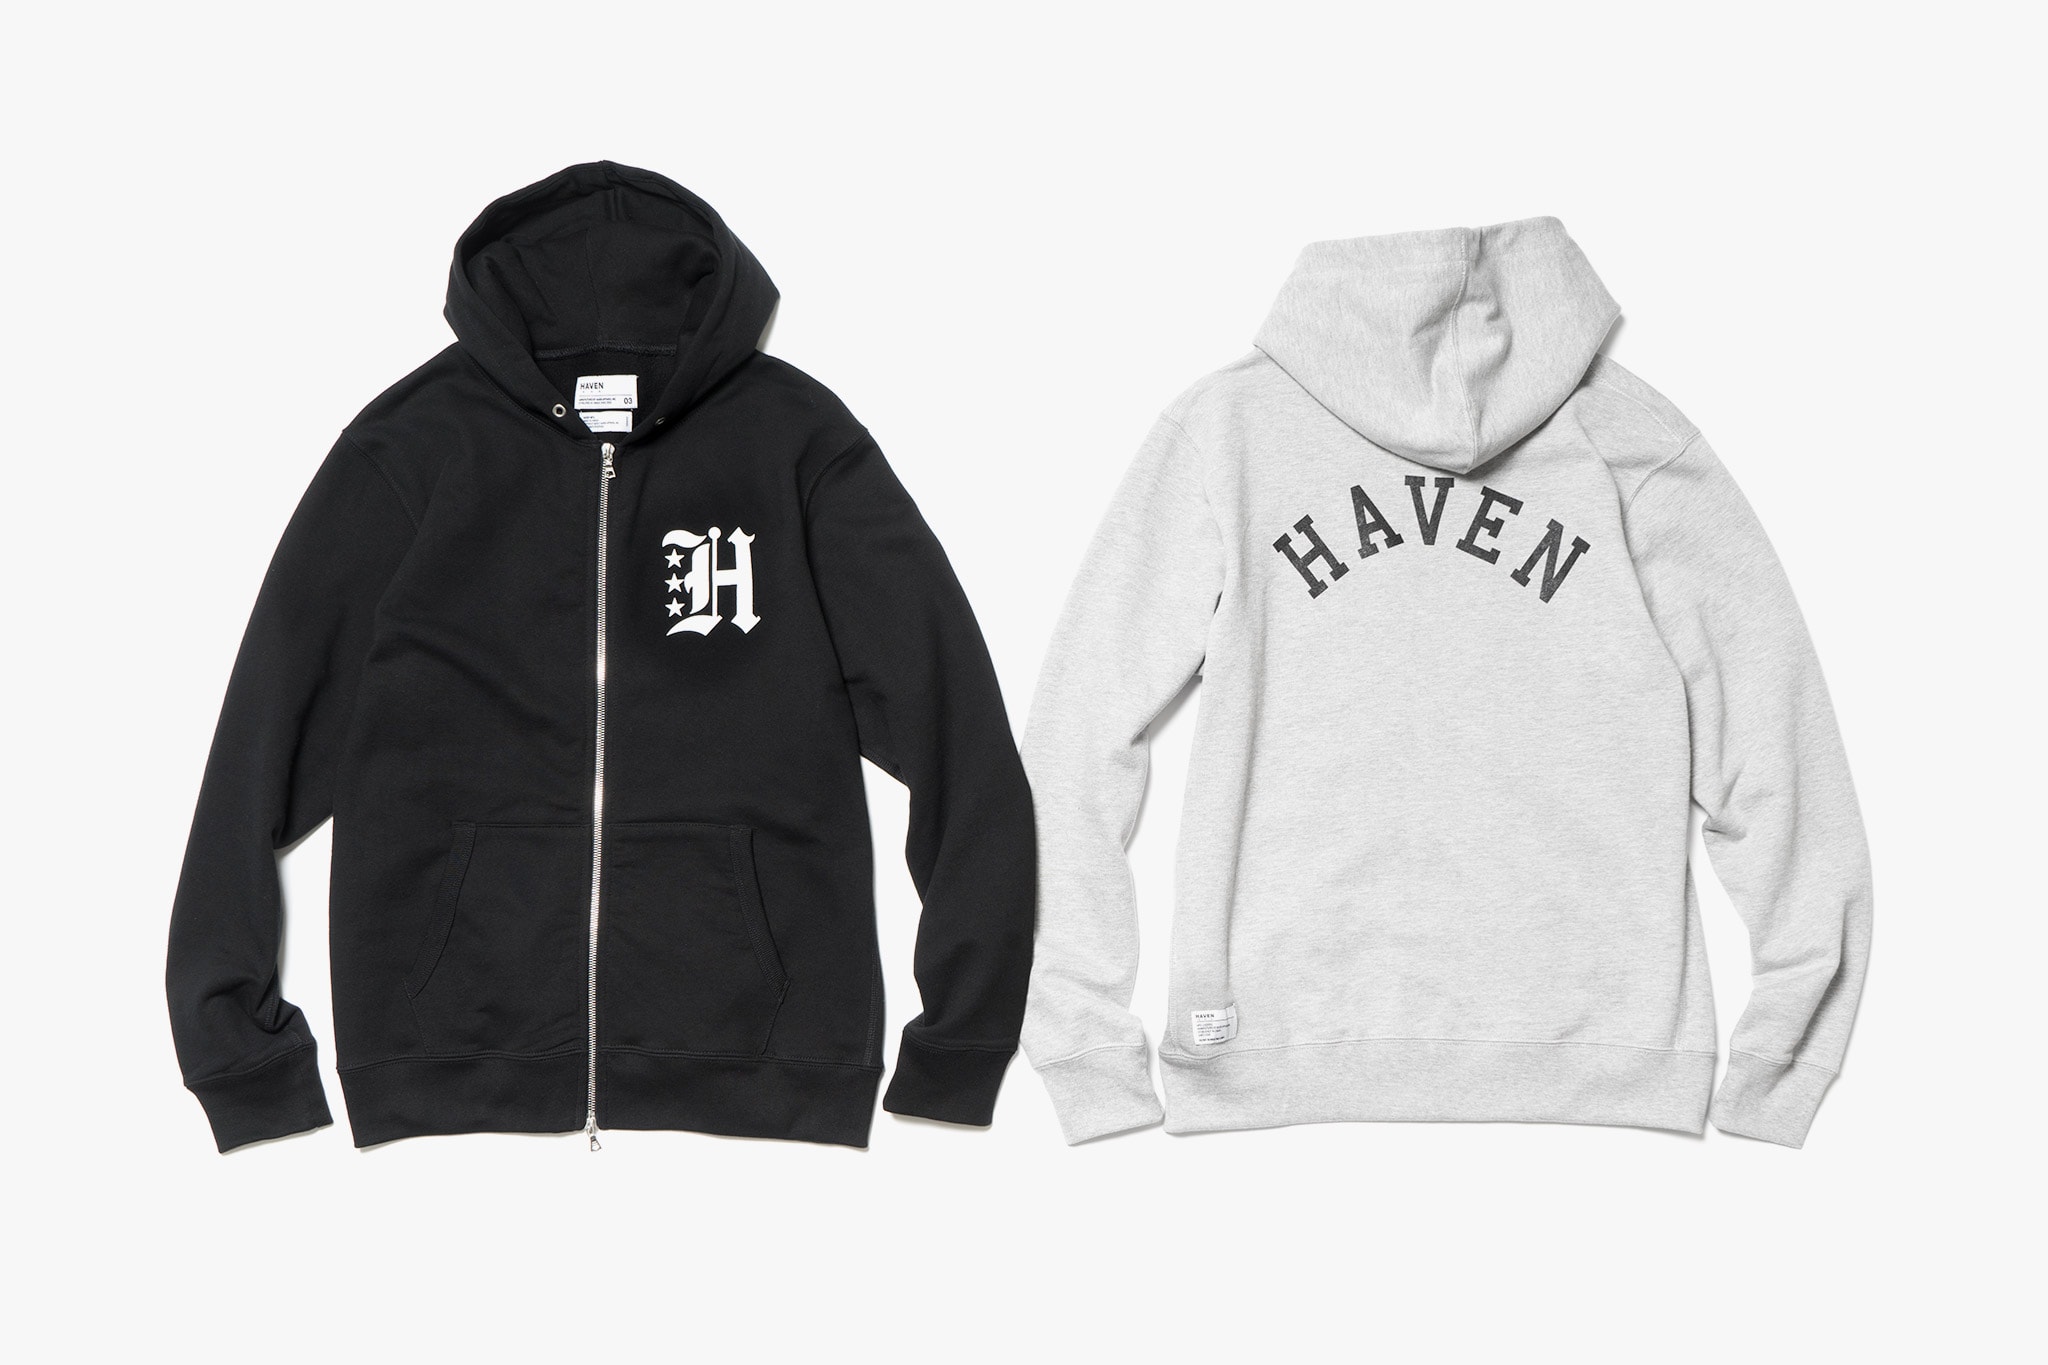 HAVEN Delivery 2 Collection Shirt Hoodies camo pants jackets